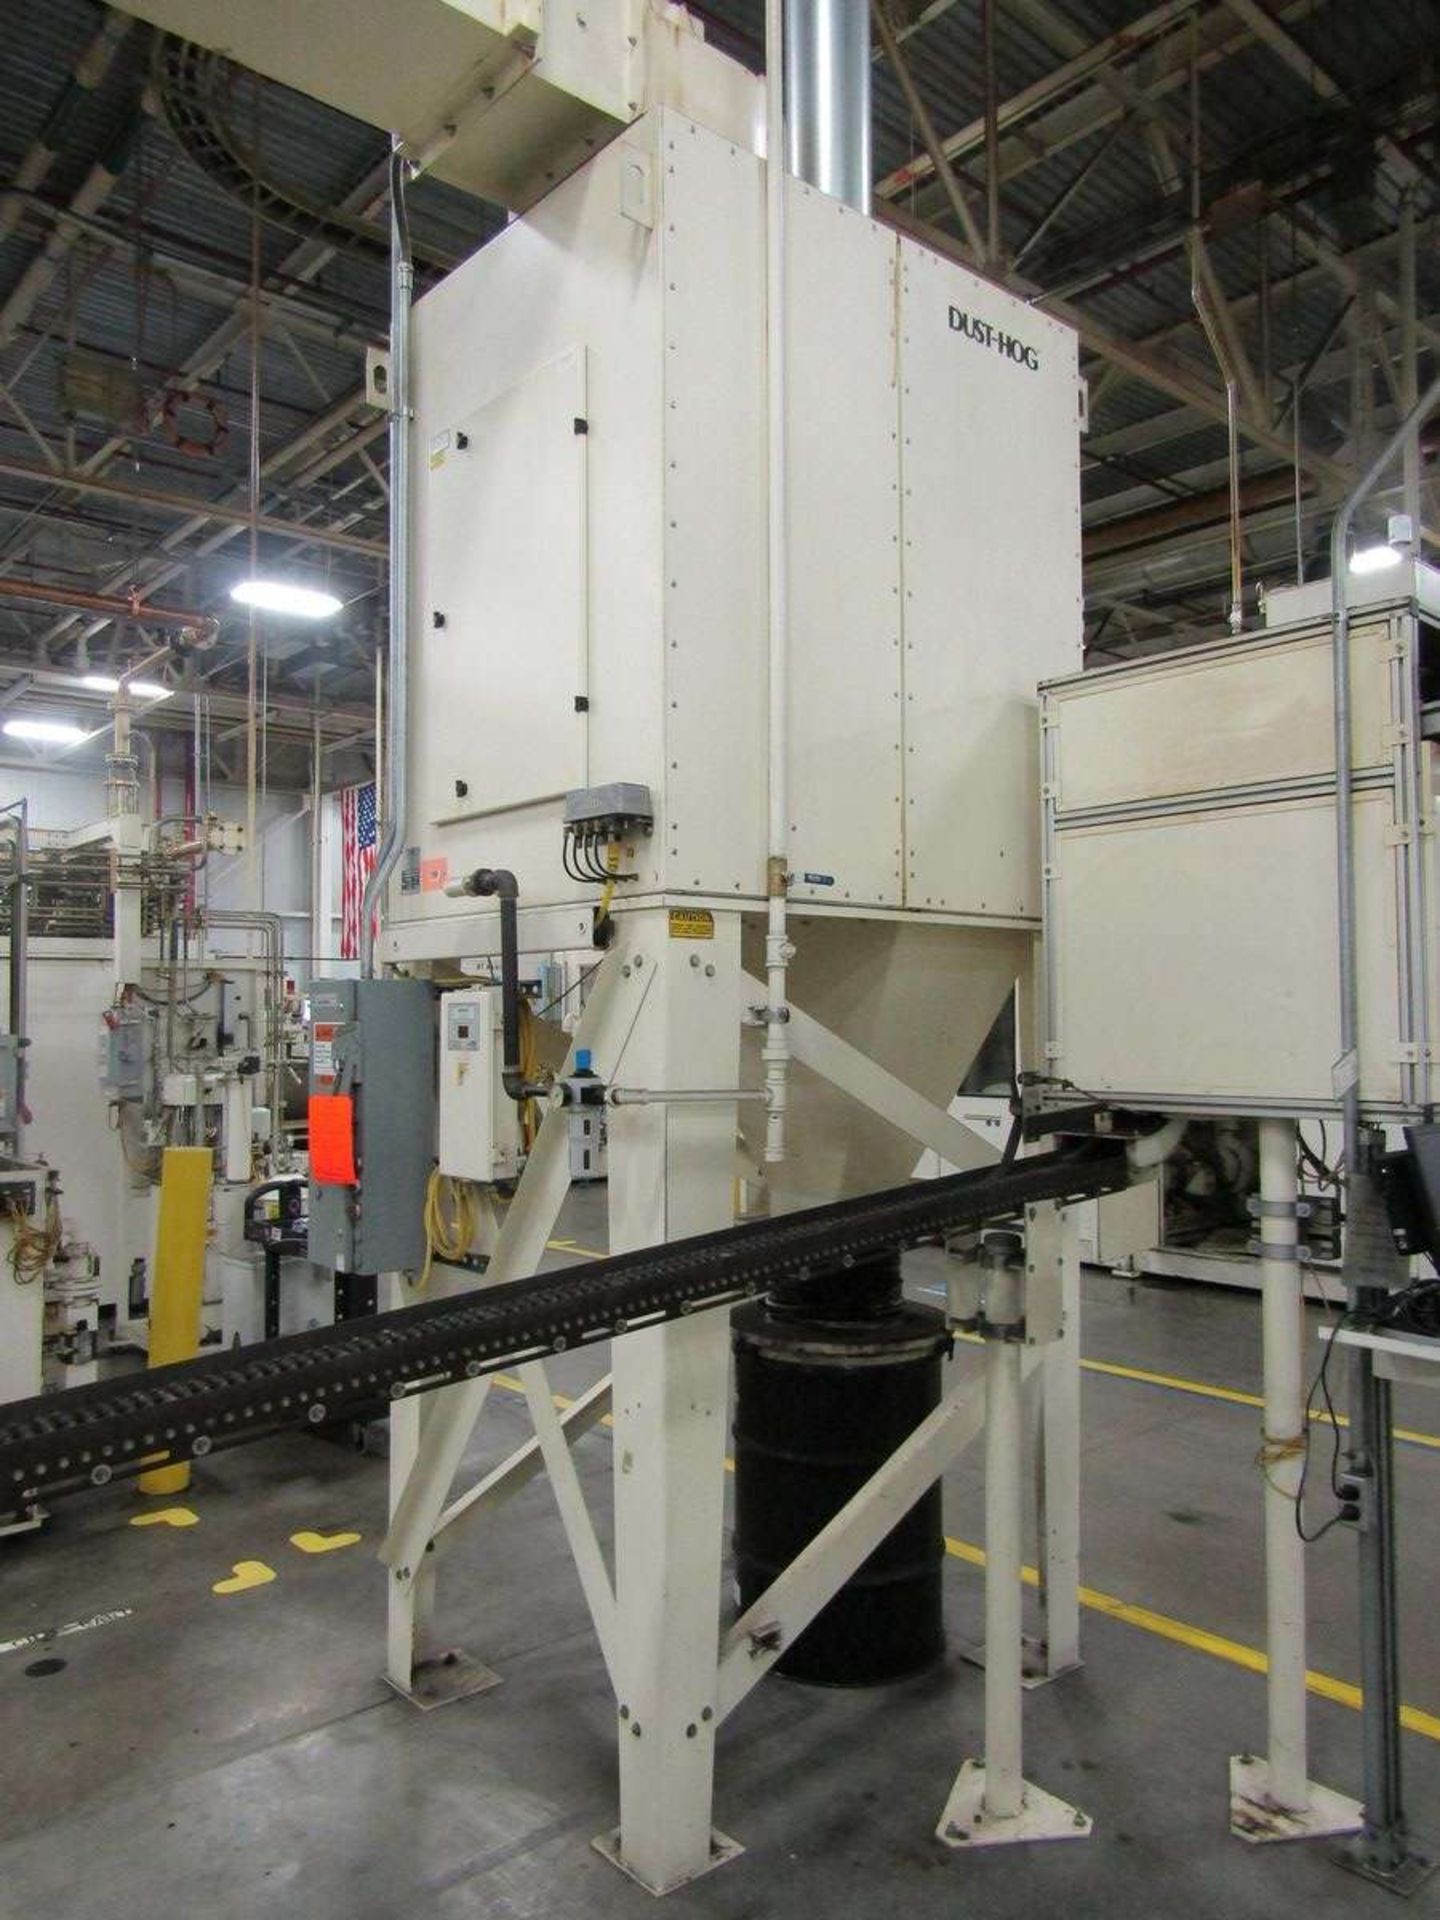 2002 United Air Specialists Inc. SBS4 "Dust Hog" 4-Bag Dust Collector - Image 3 of 5